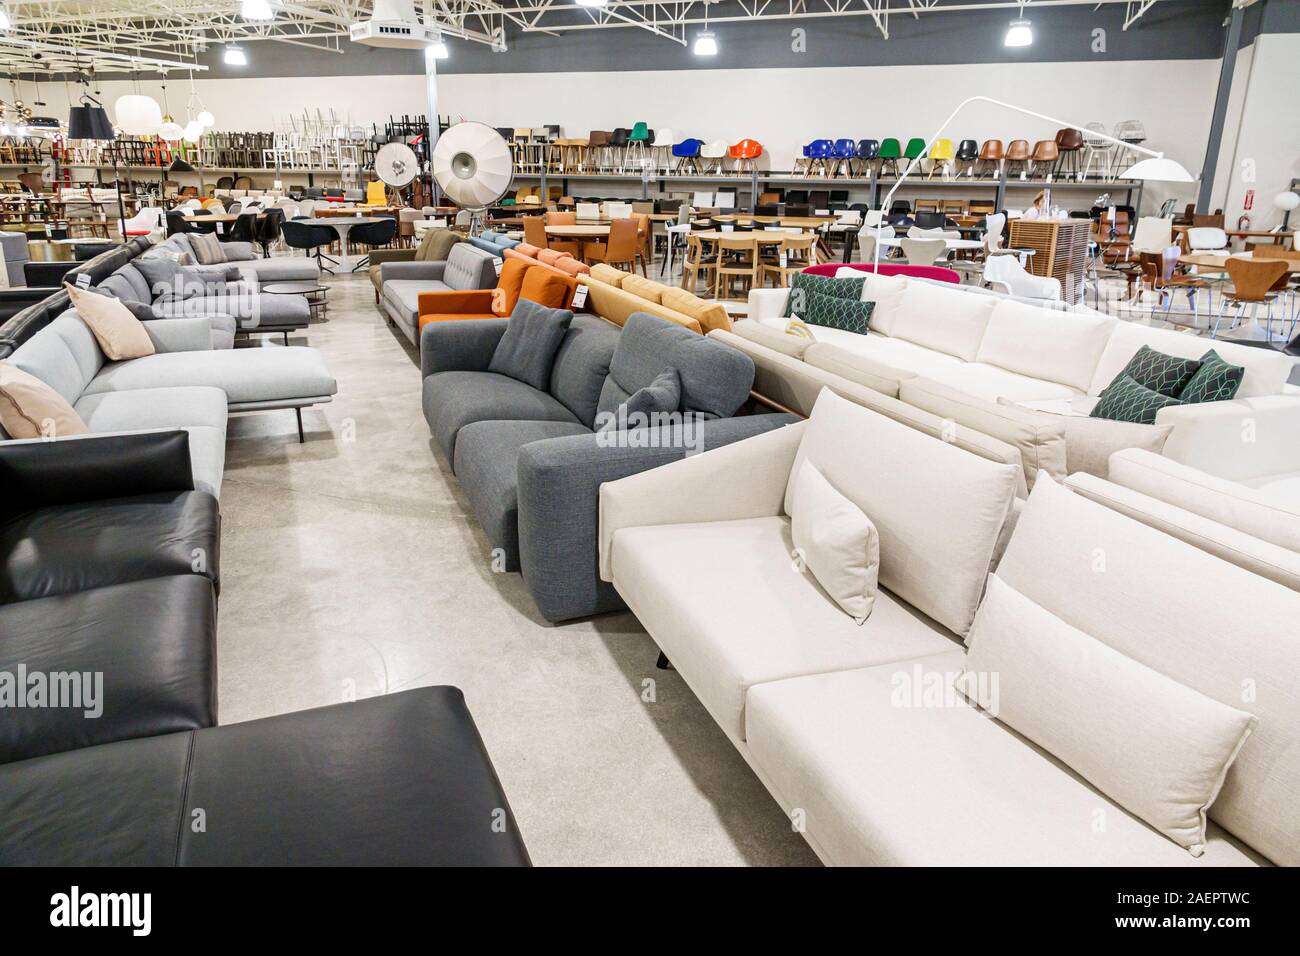 Shopping Furniture Couch Stock Photos Shopping Furniture Couch